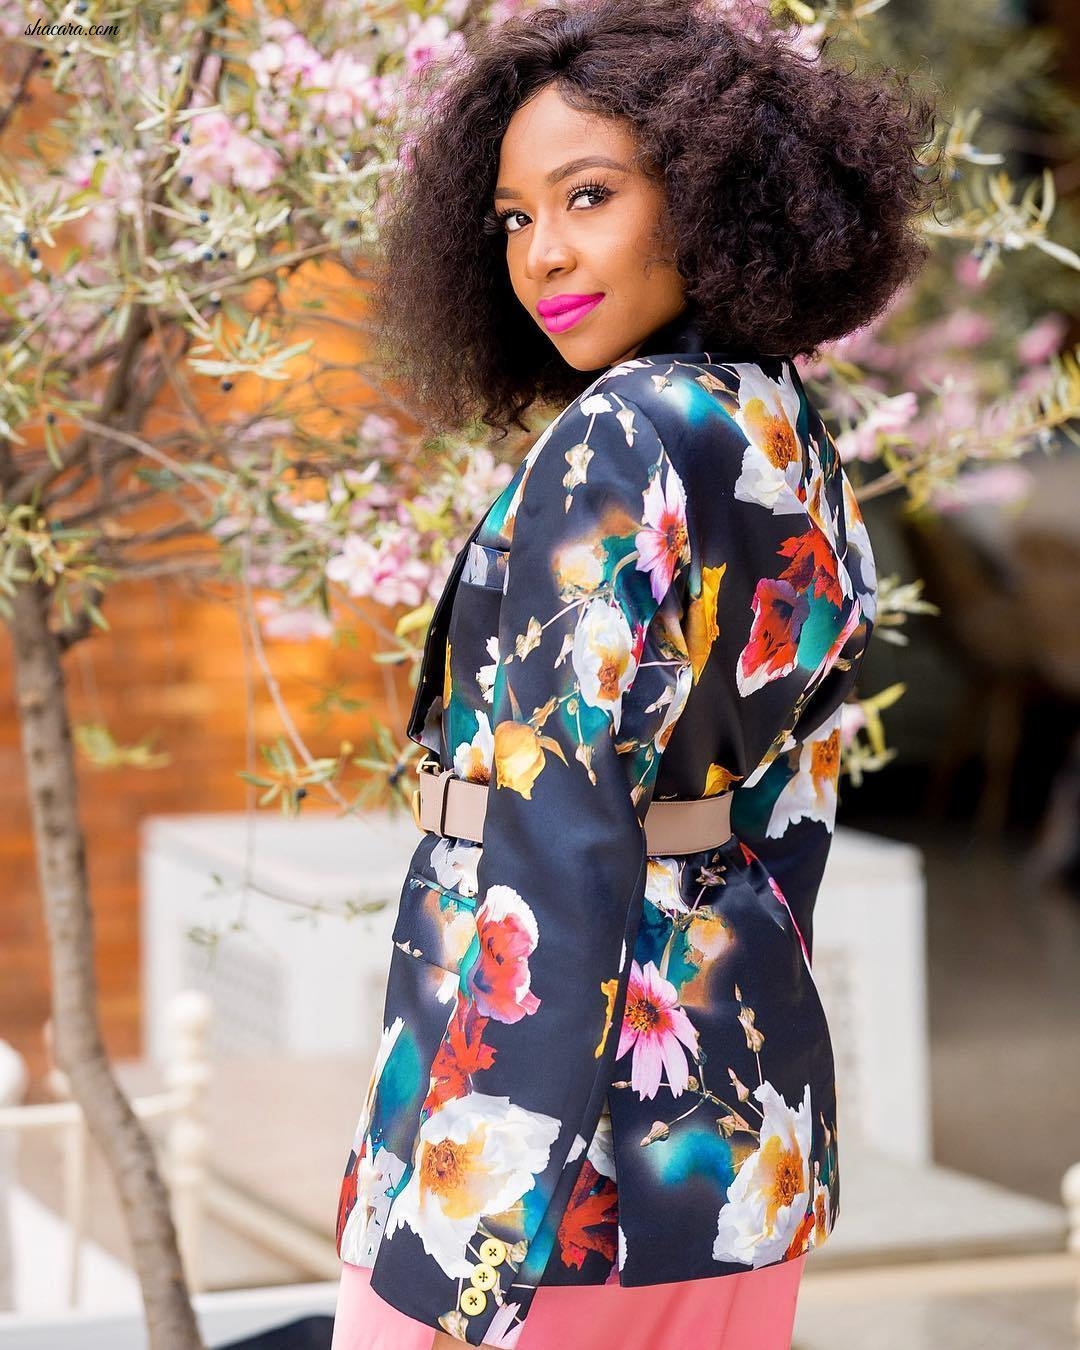 Style Look Of The Day: Blue Mbombo’s Uber Chic Floral Ensemble